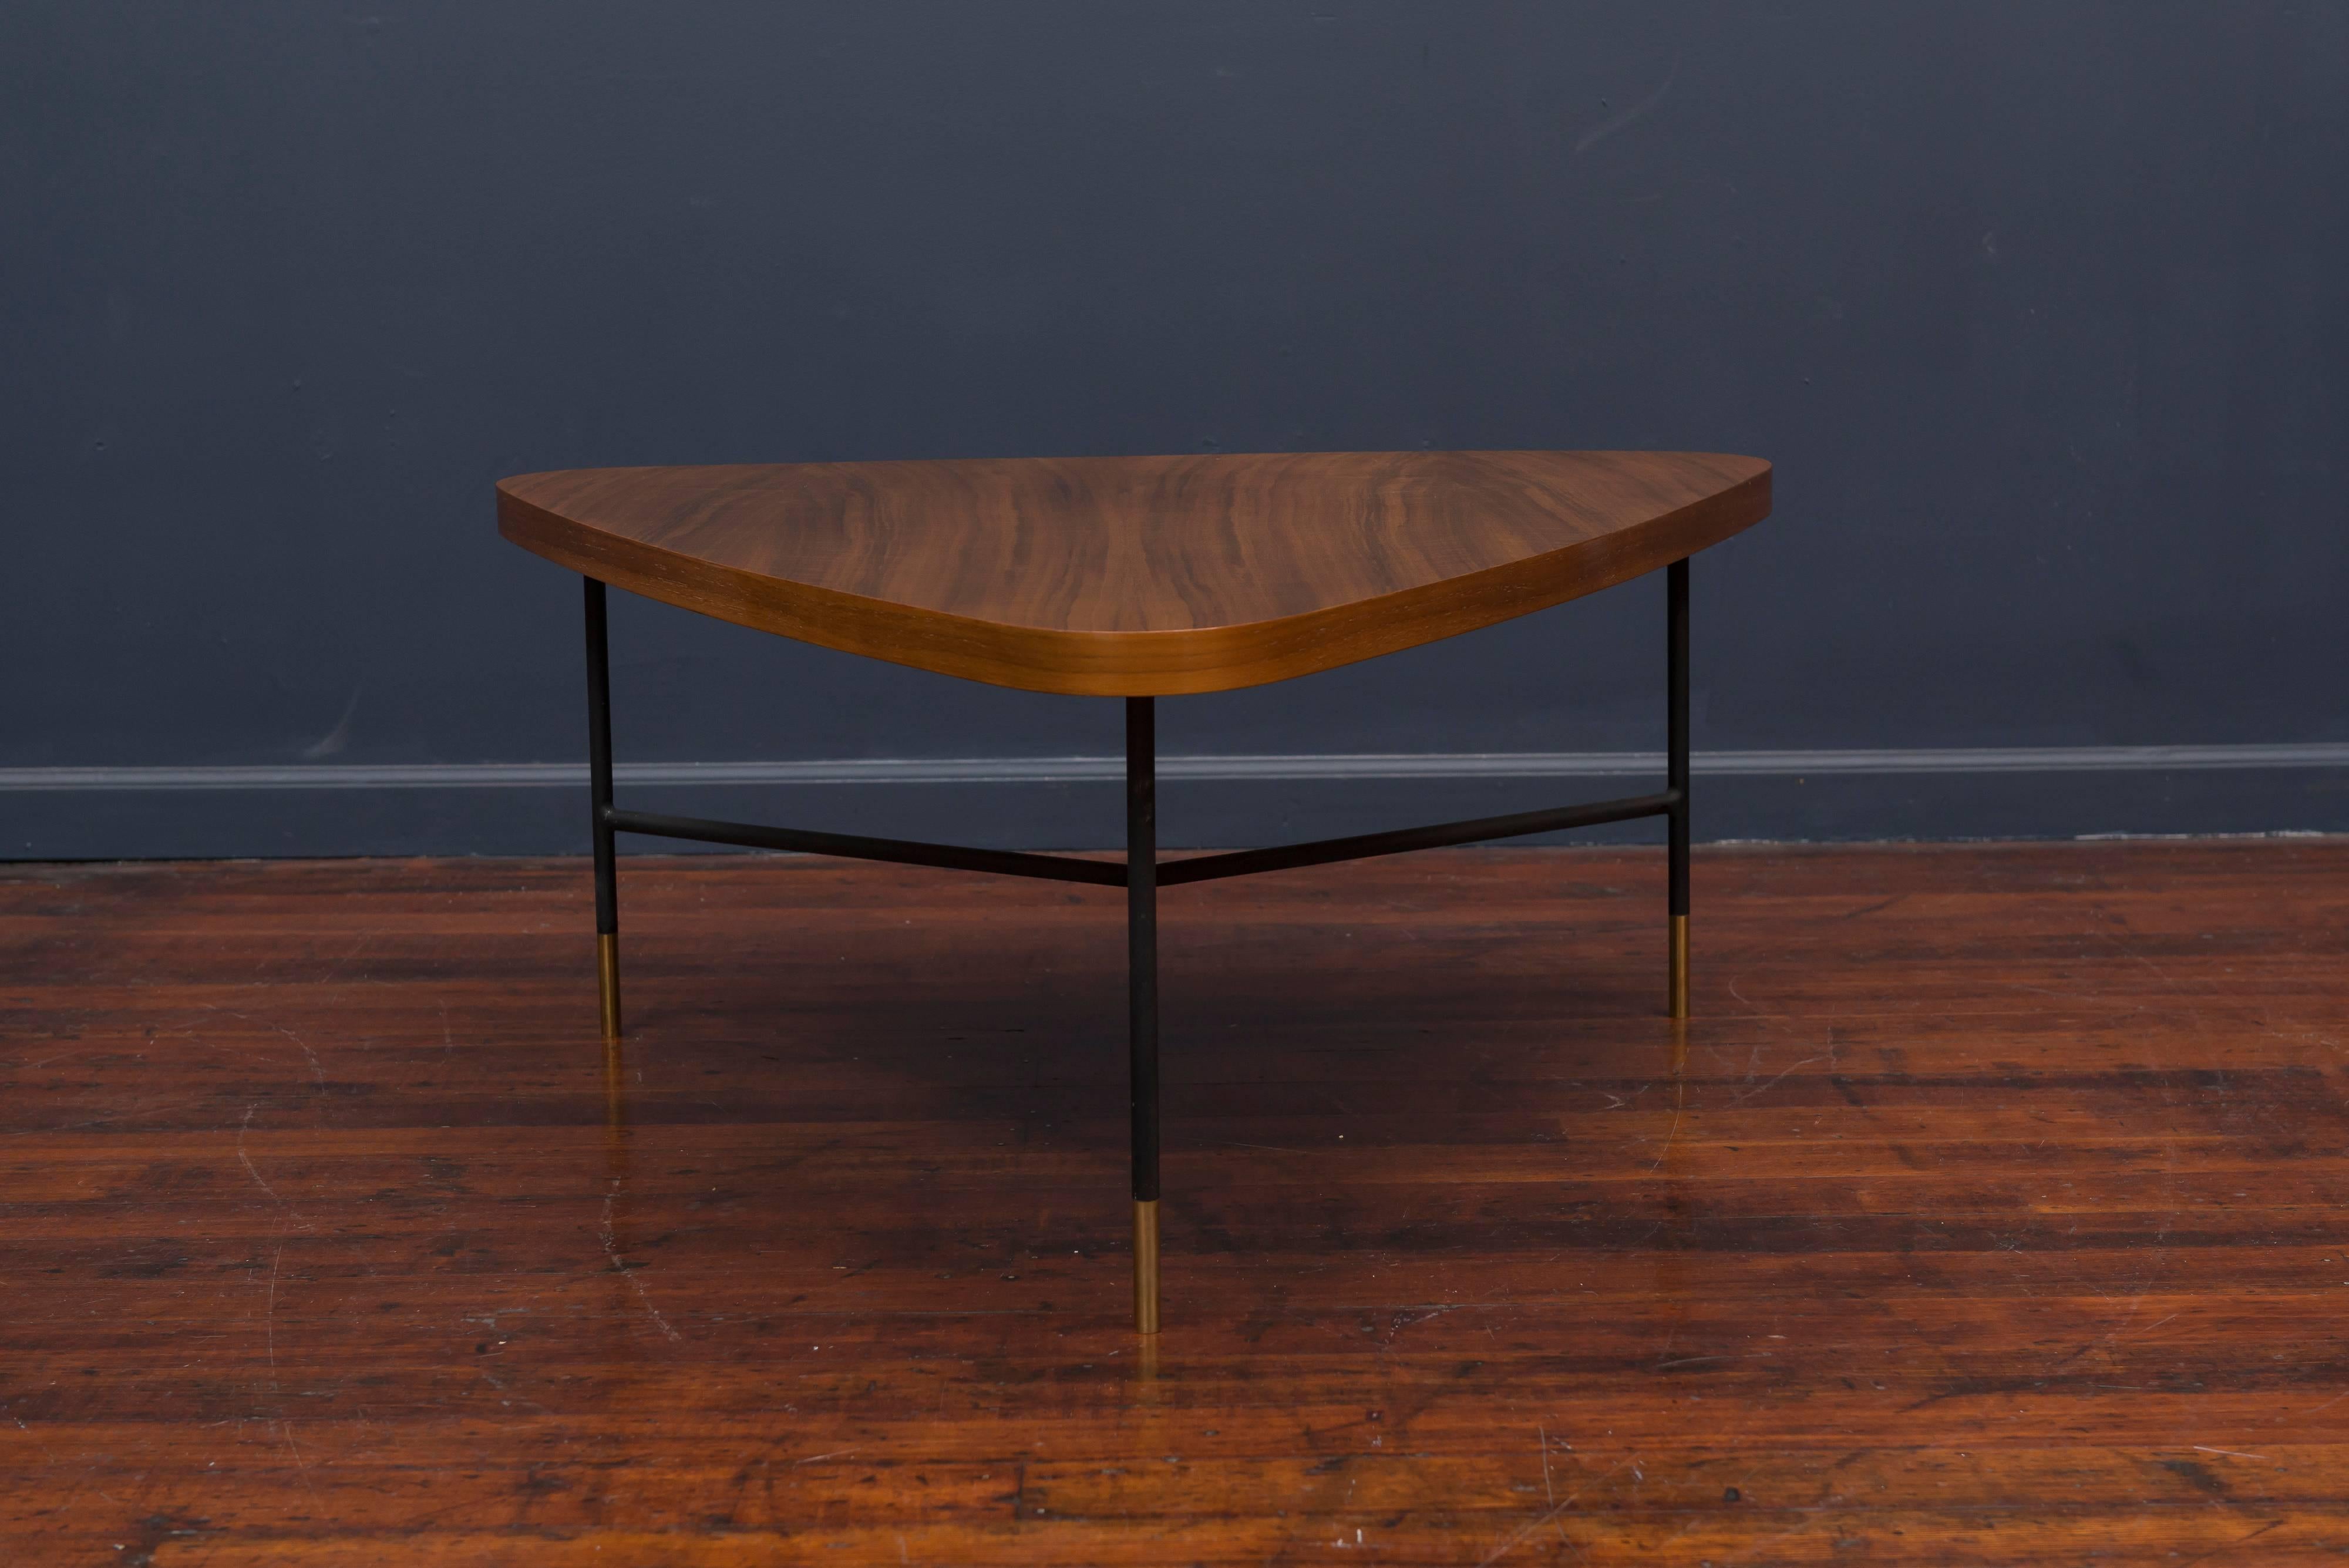 Gorgeous Italian dramatic walnut triangular coffee table designed by Vito Latis for Singer & Son's, Italy. Excellent original condition showing only a minor scuff and indentation on the wood, solid steel legs with brass feet, labelled.